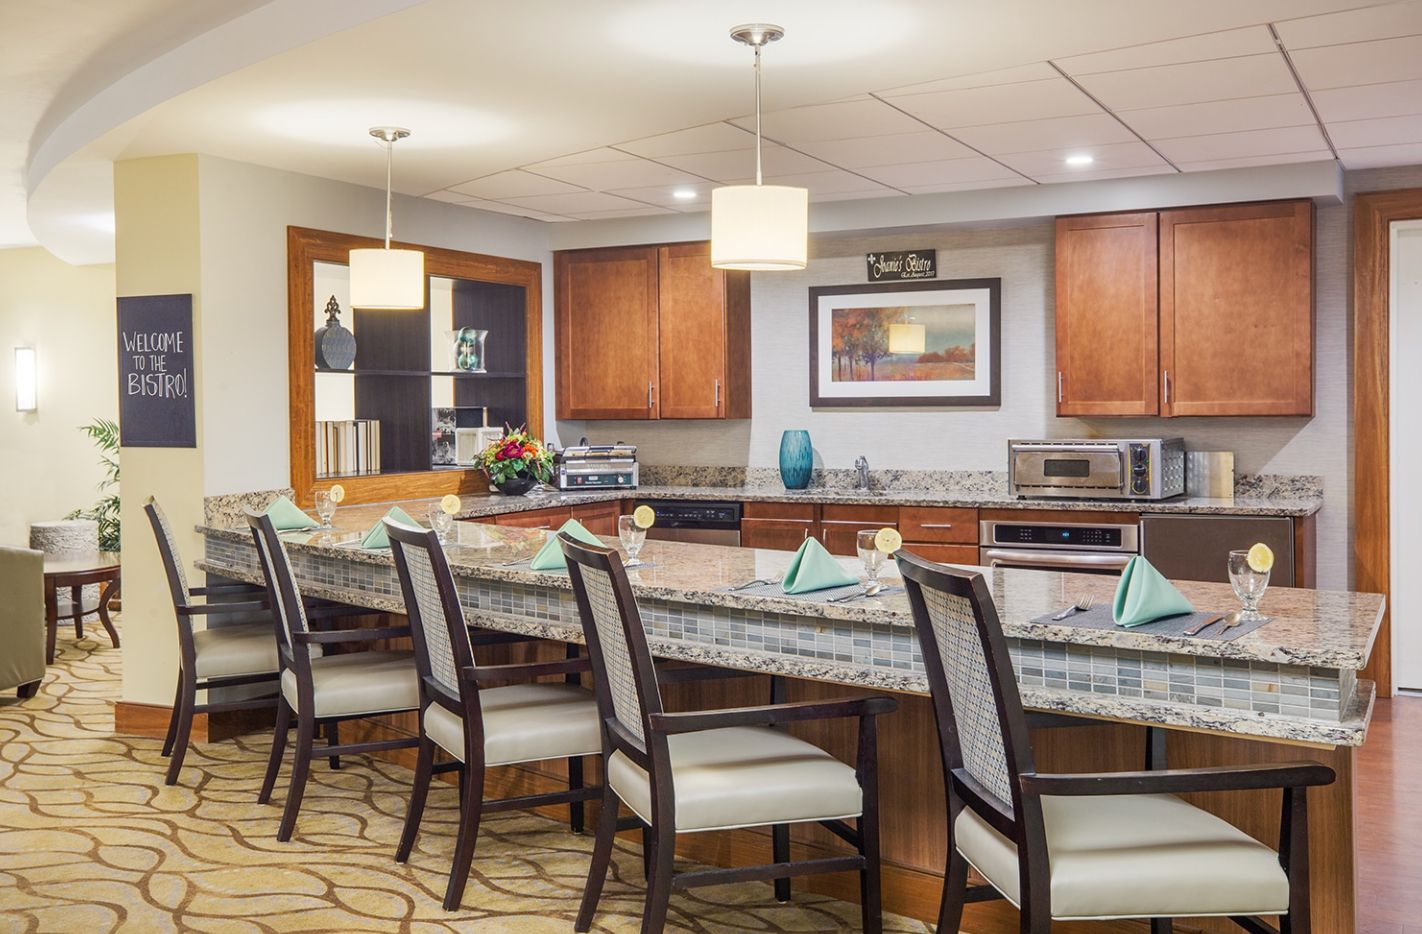 Interior view of The Residence At Watertown Square senior living community featuring dining and kitchen area.